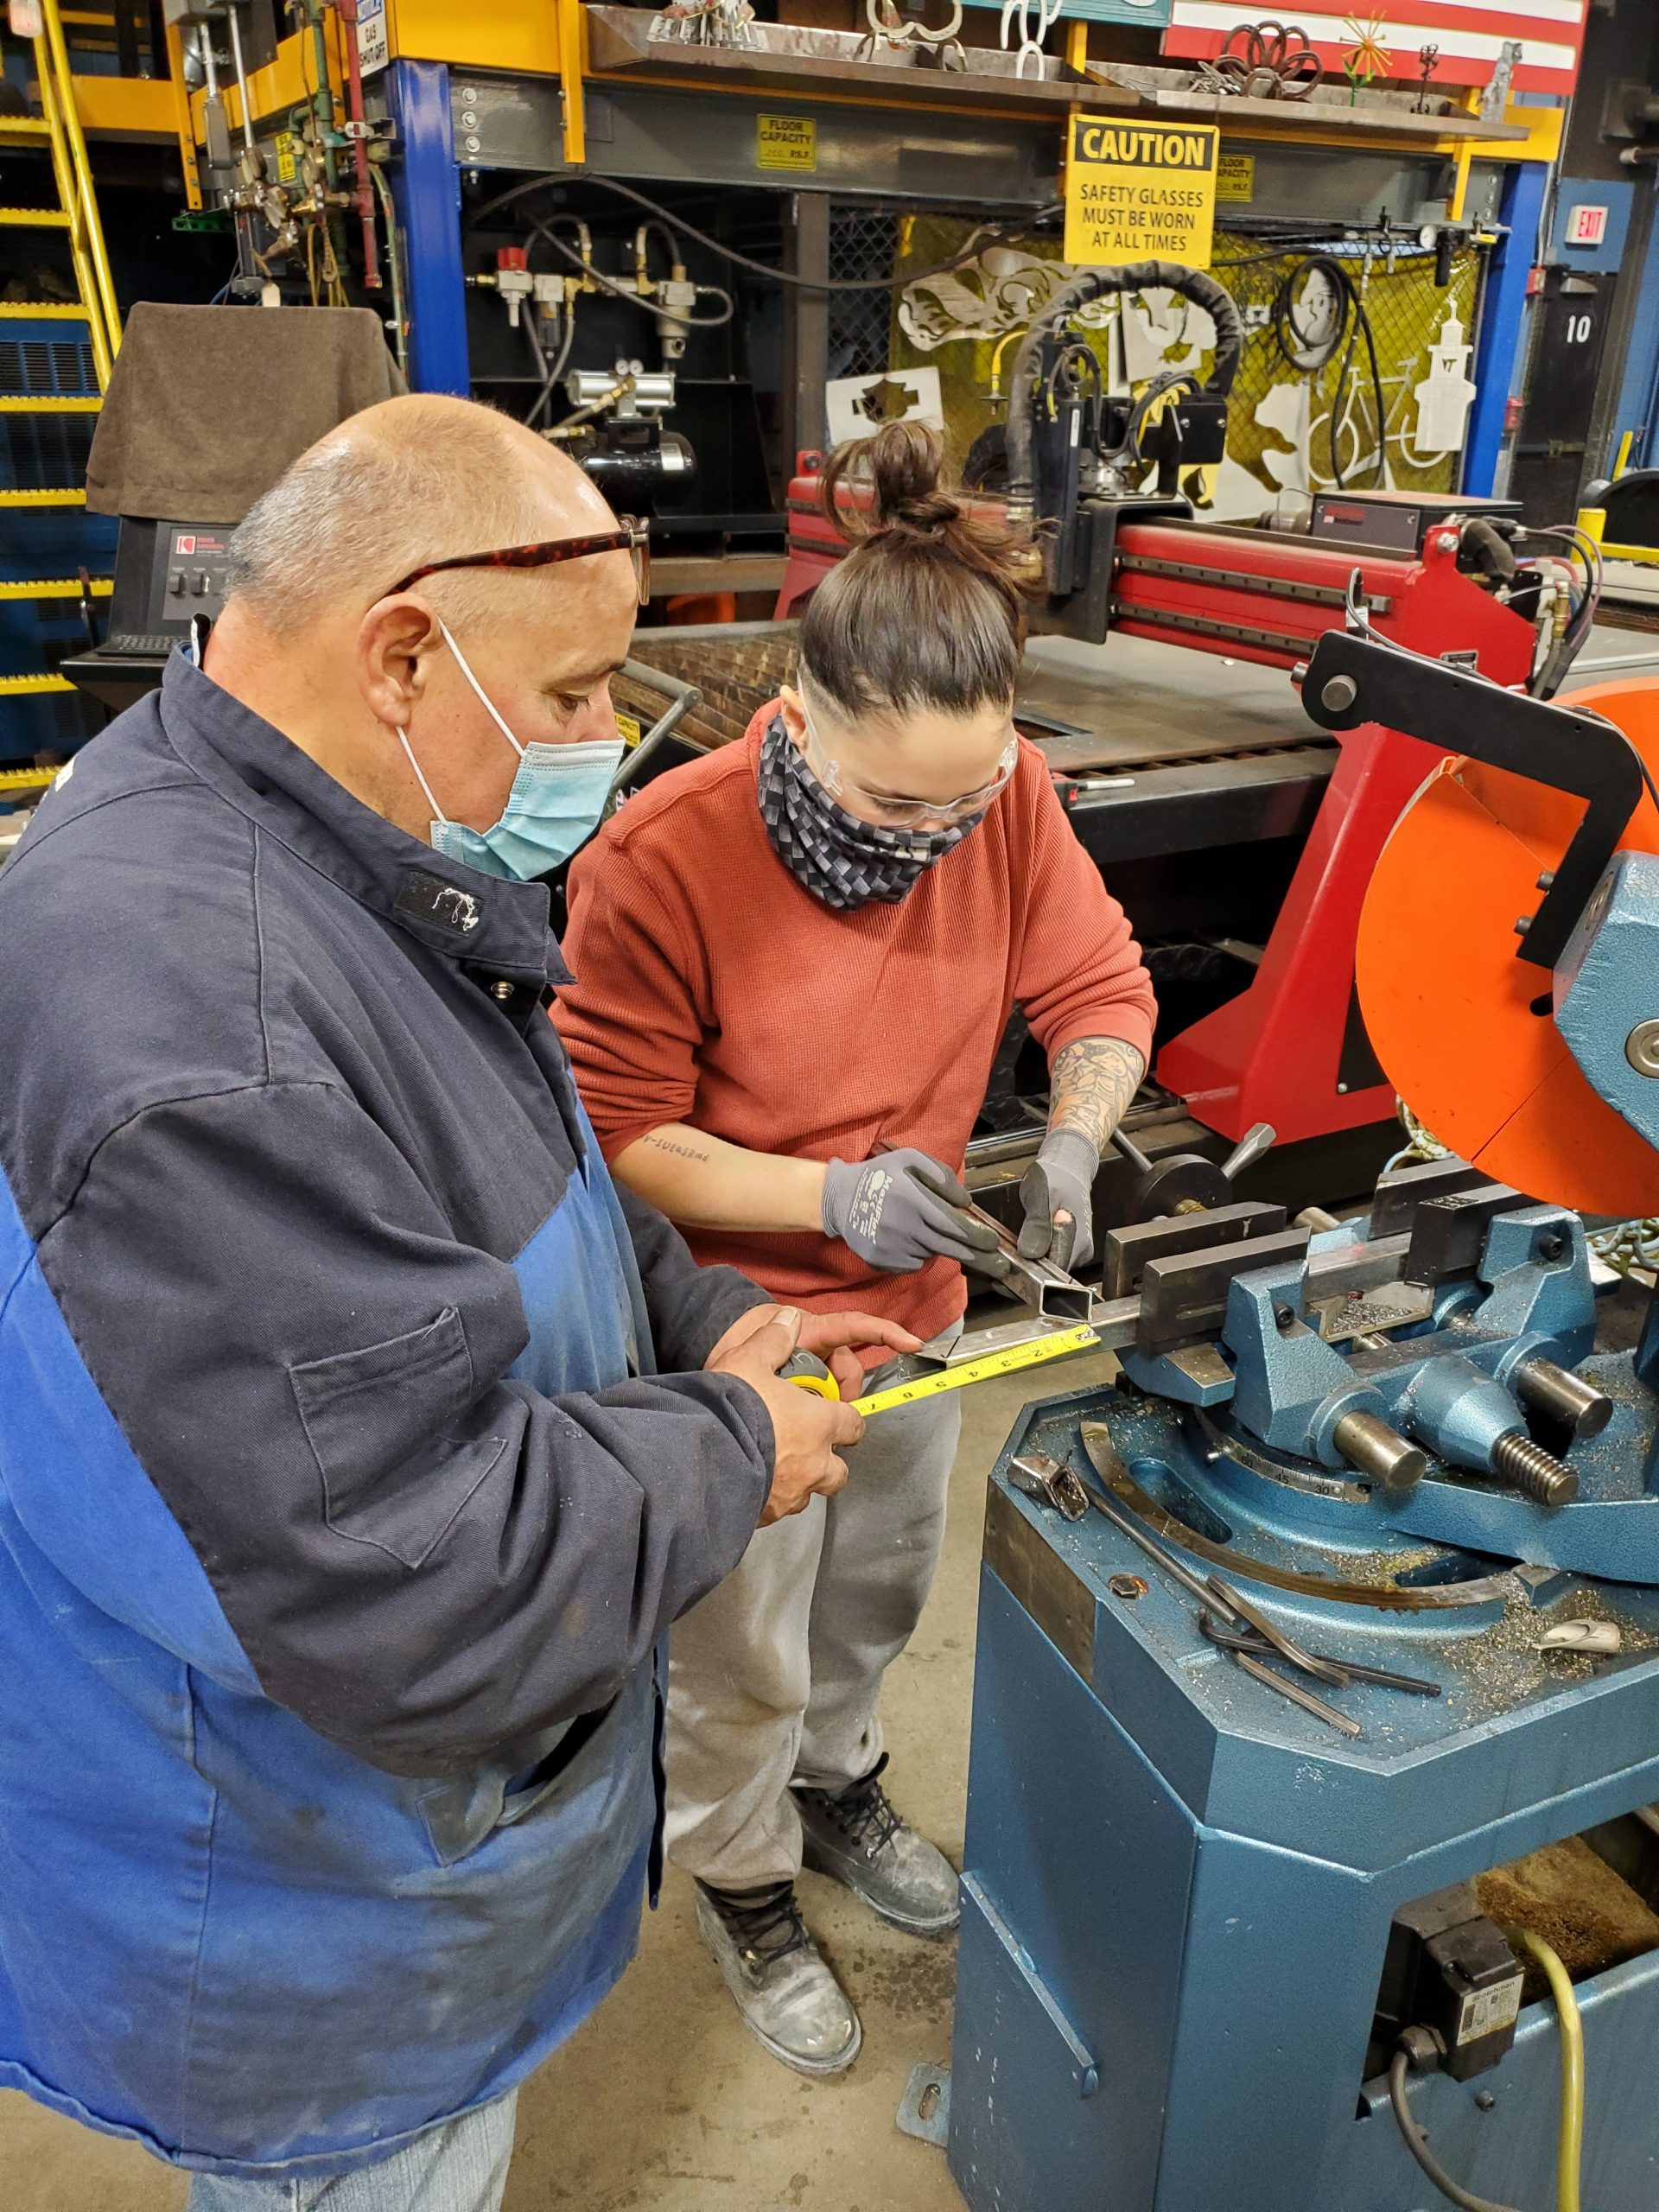 Mig Tig Welding Class student works with instructor on equipment